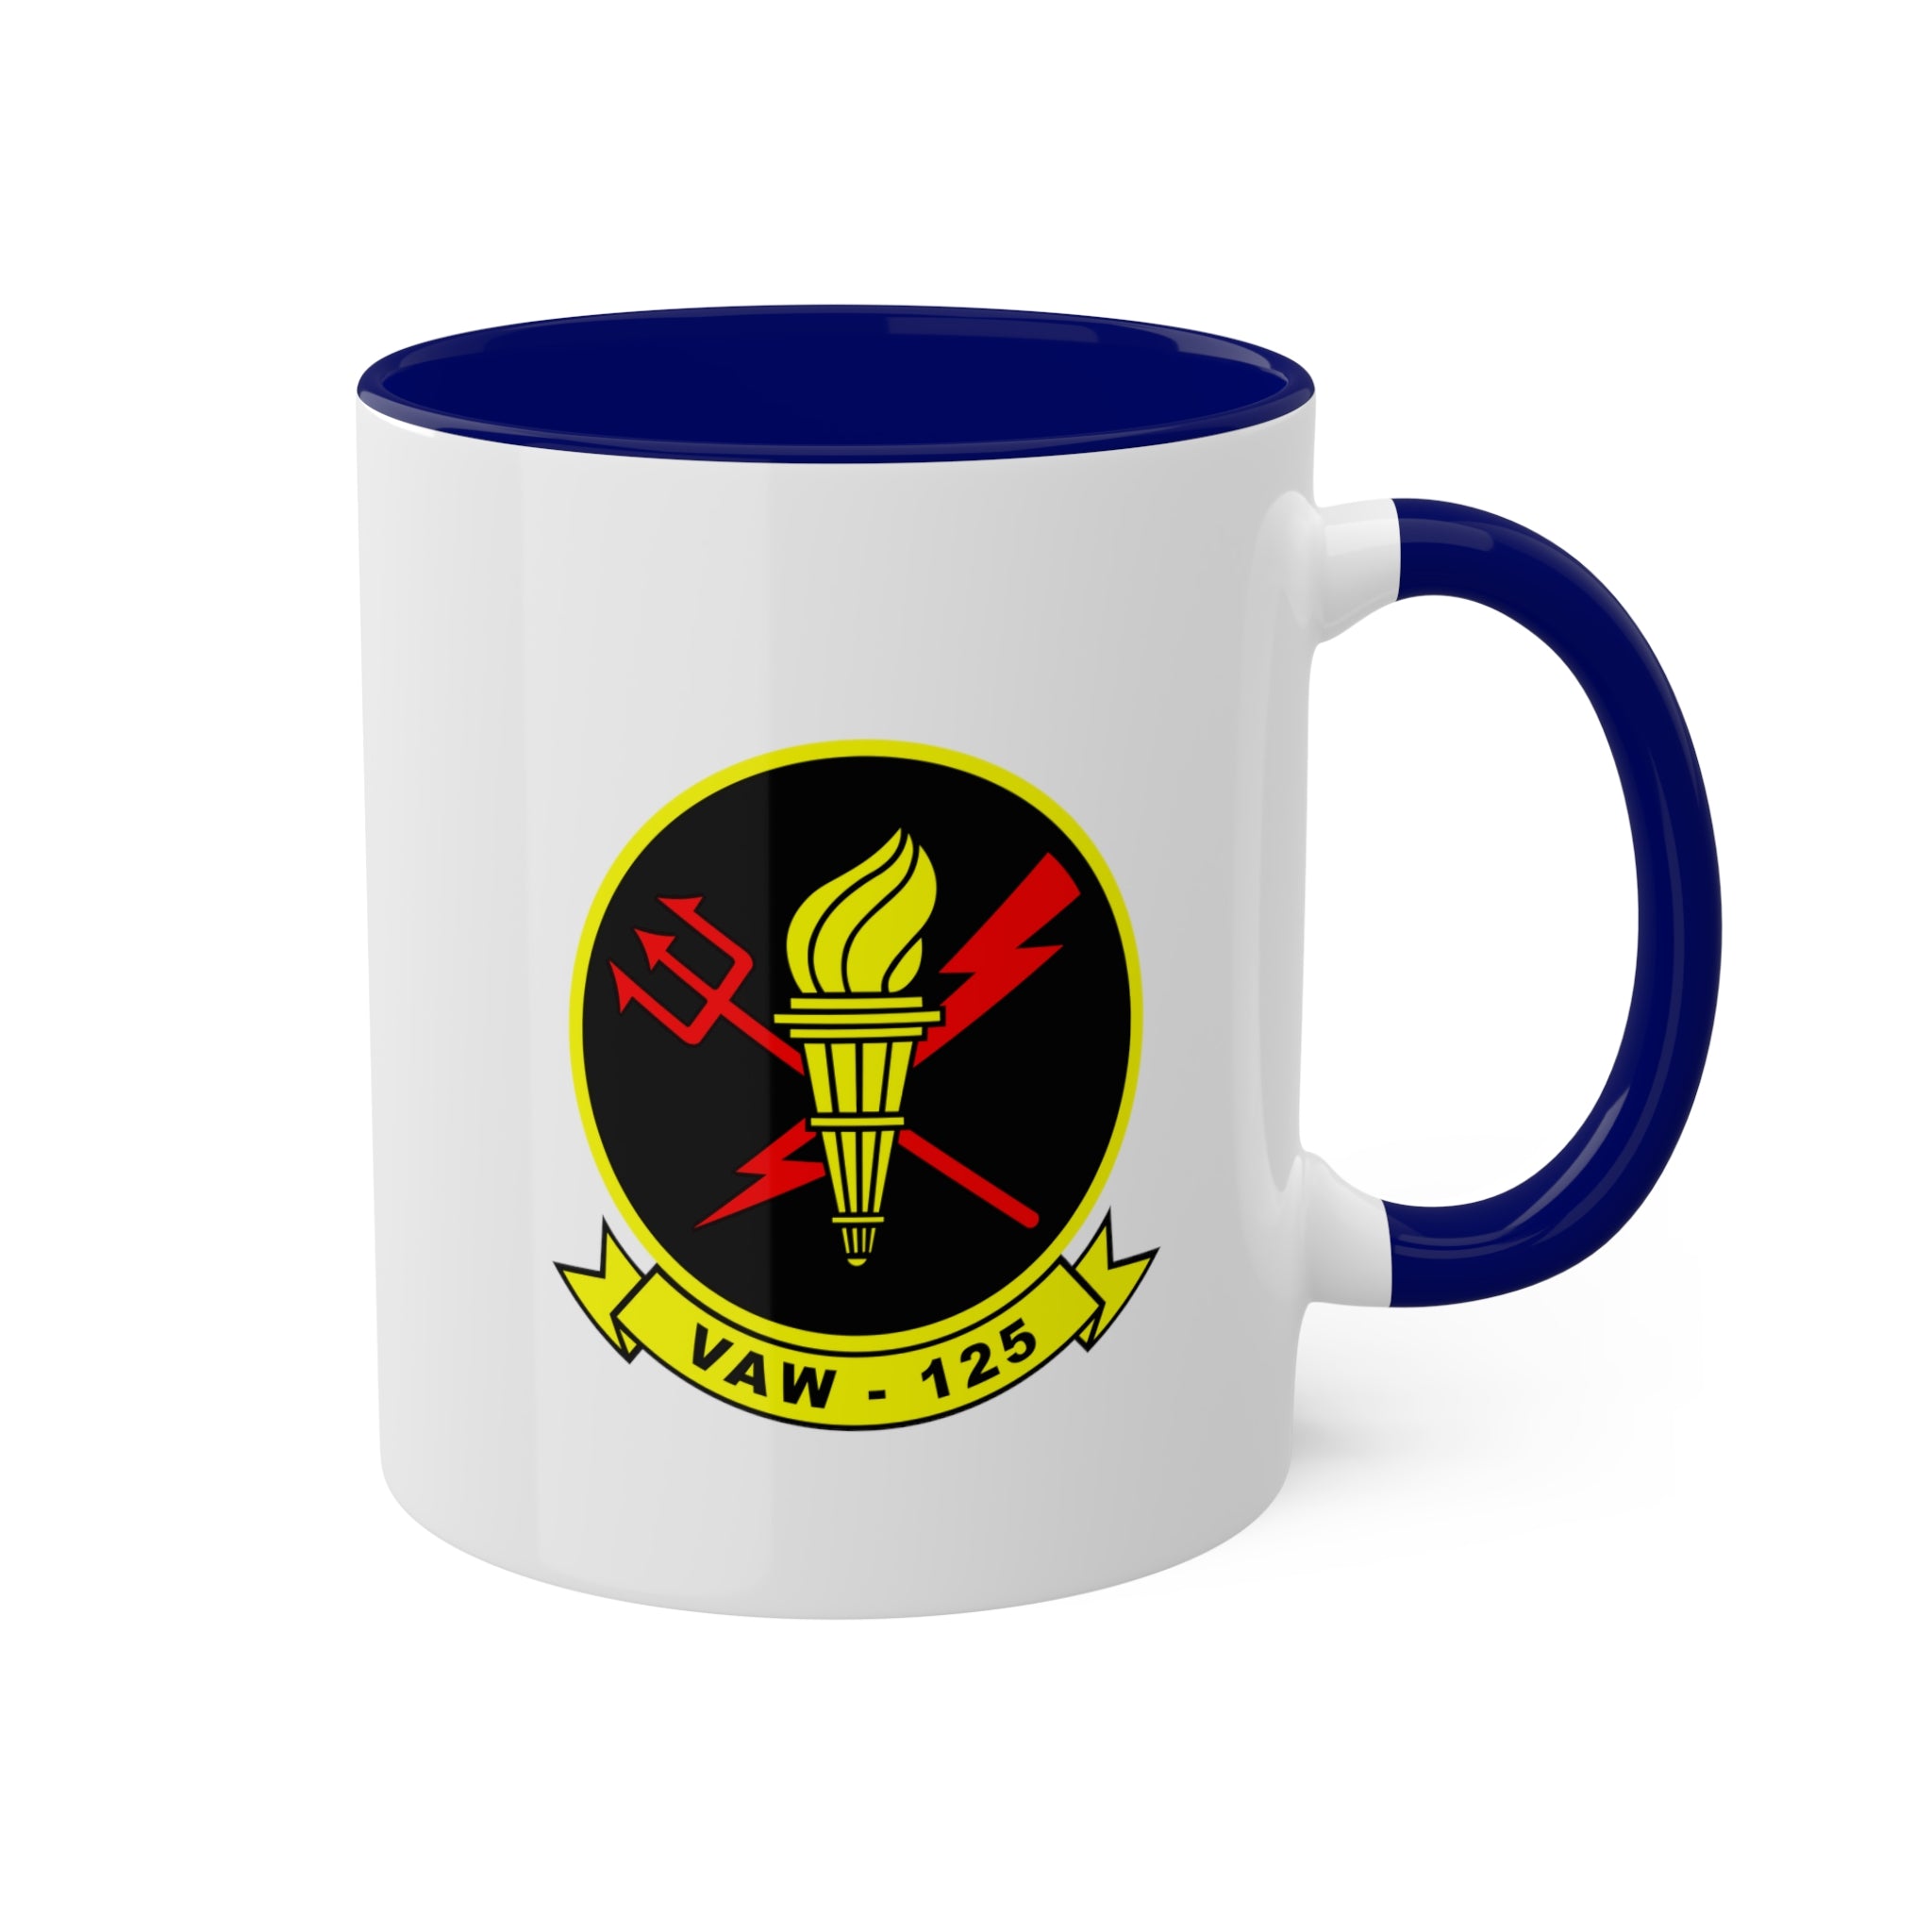 VAW-125 "Torch Bearers" -No Wings- 10oz. Mug, Navy Airborne Command and Control